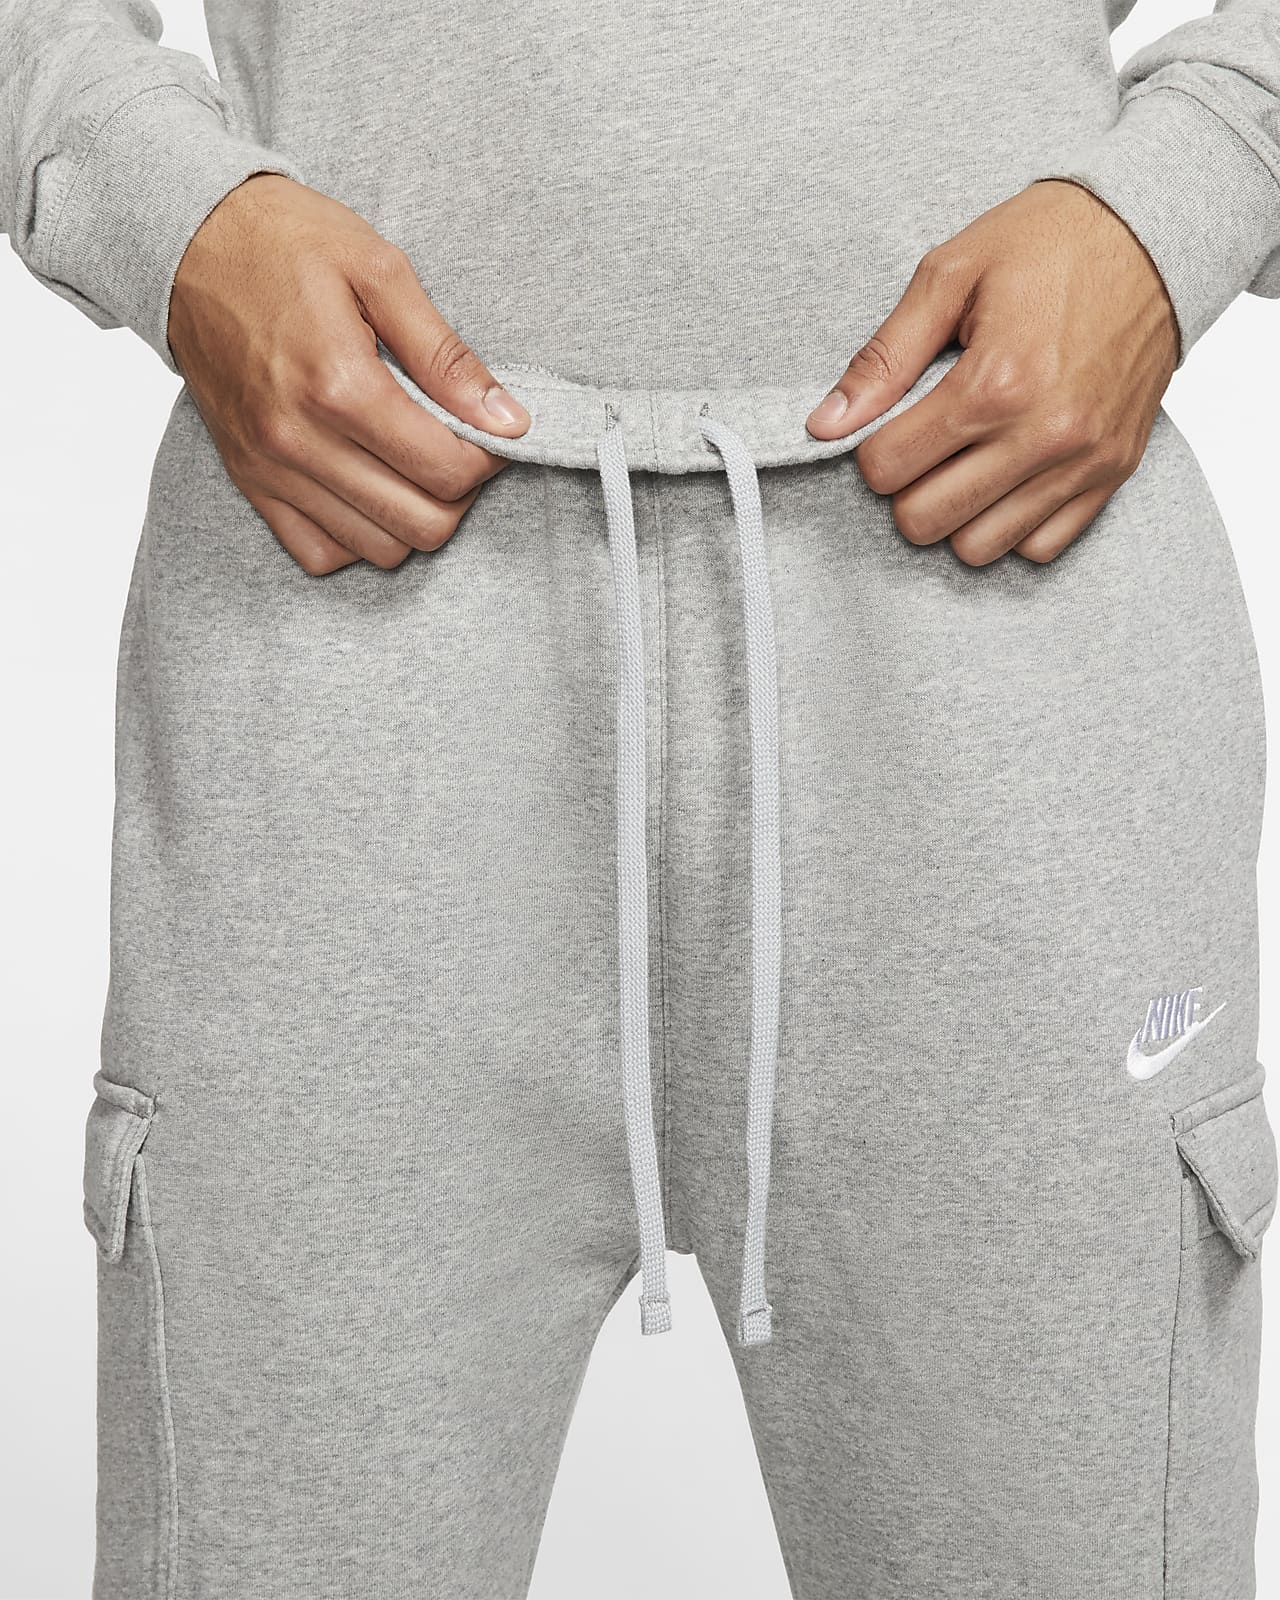 Stay Comfortable and Stylish with Nike Men's Club Fleece Cargo Joggers